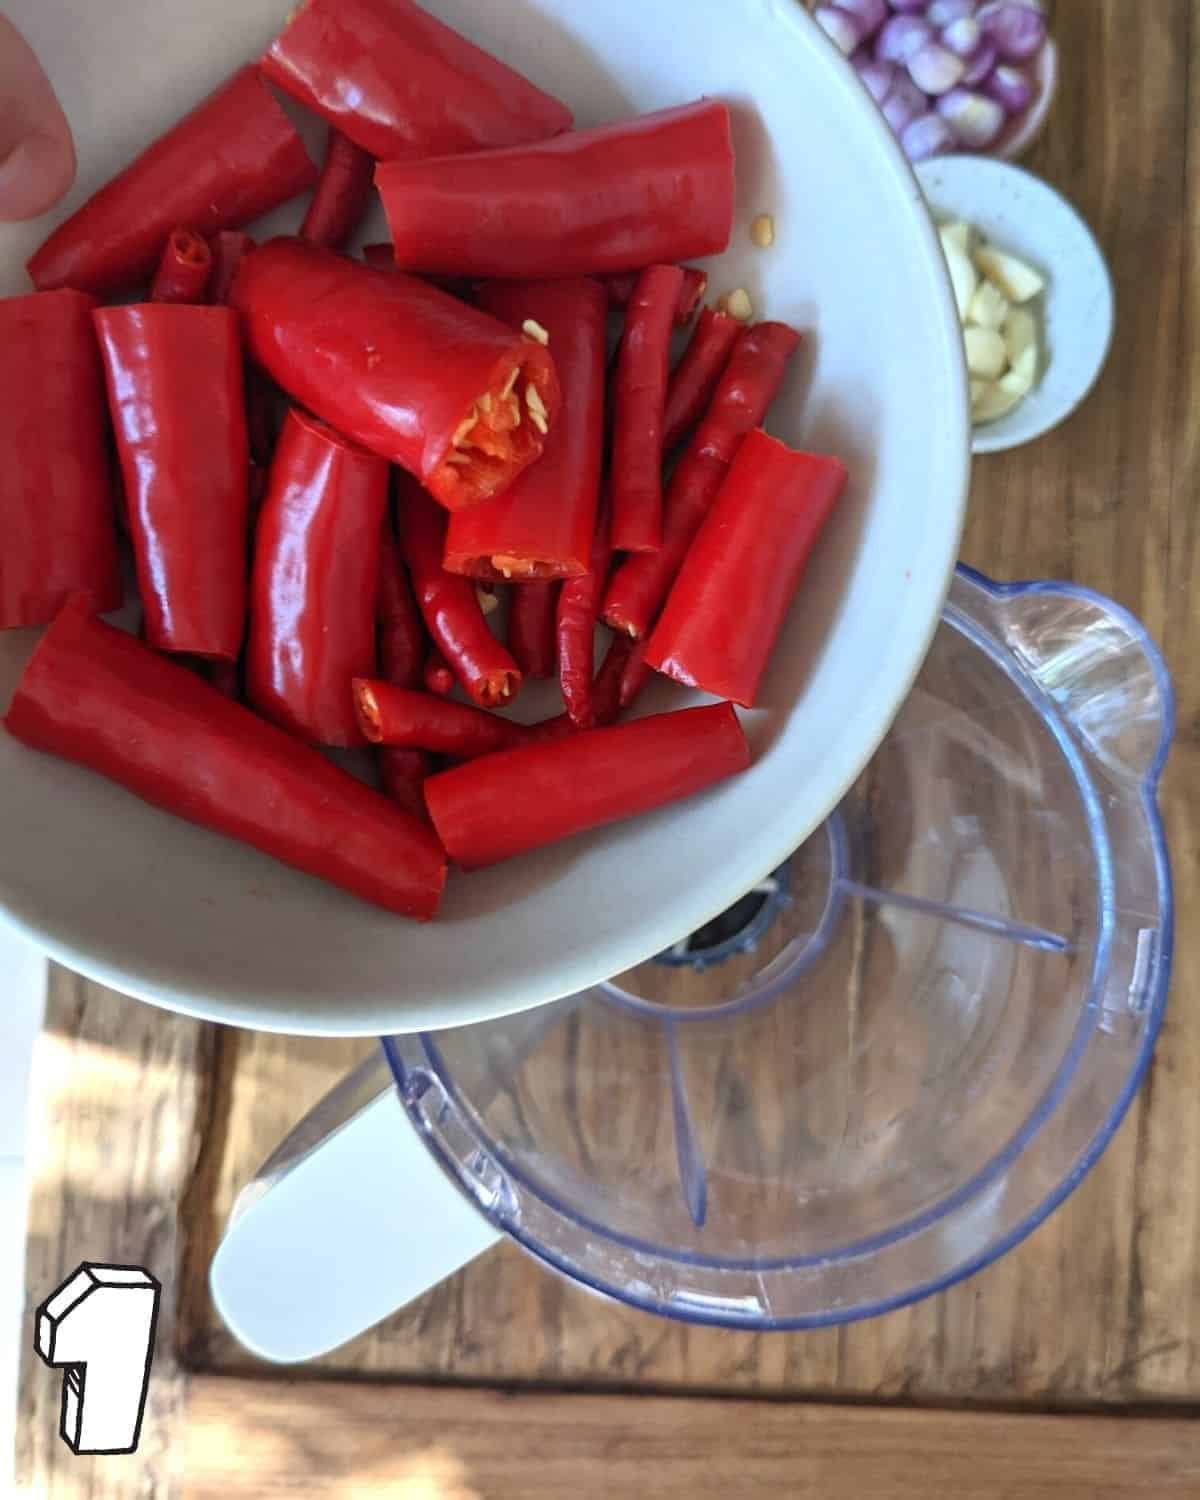 Chopped chillies being held over a blender jug